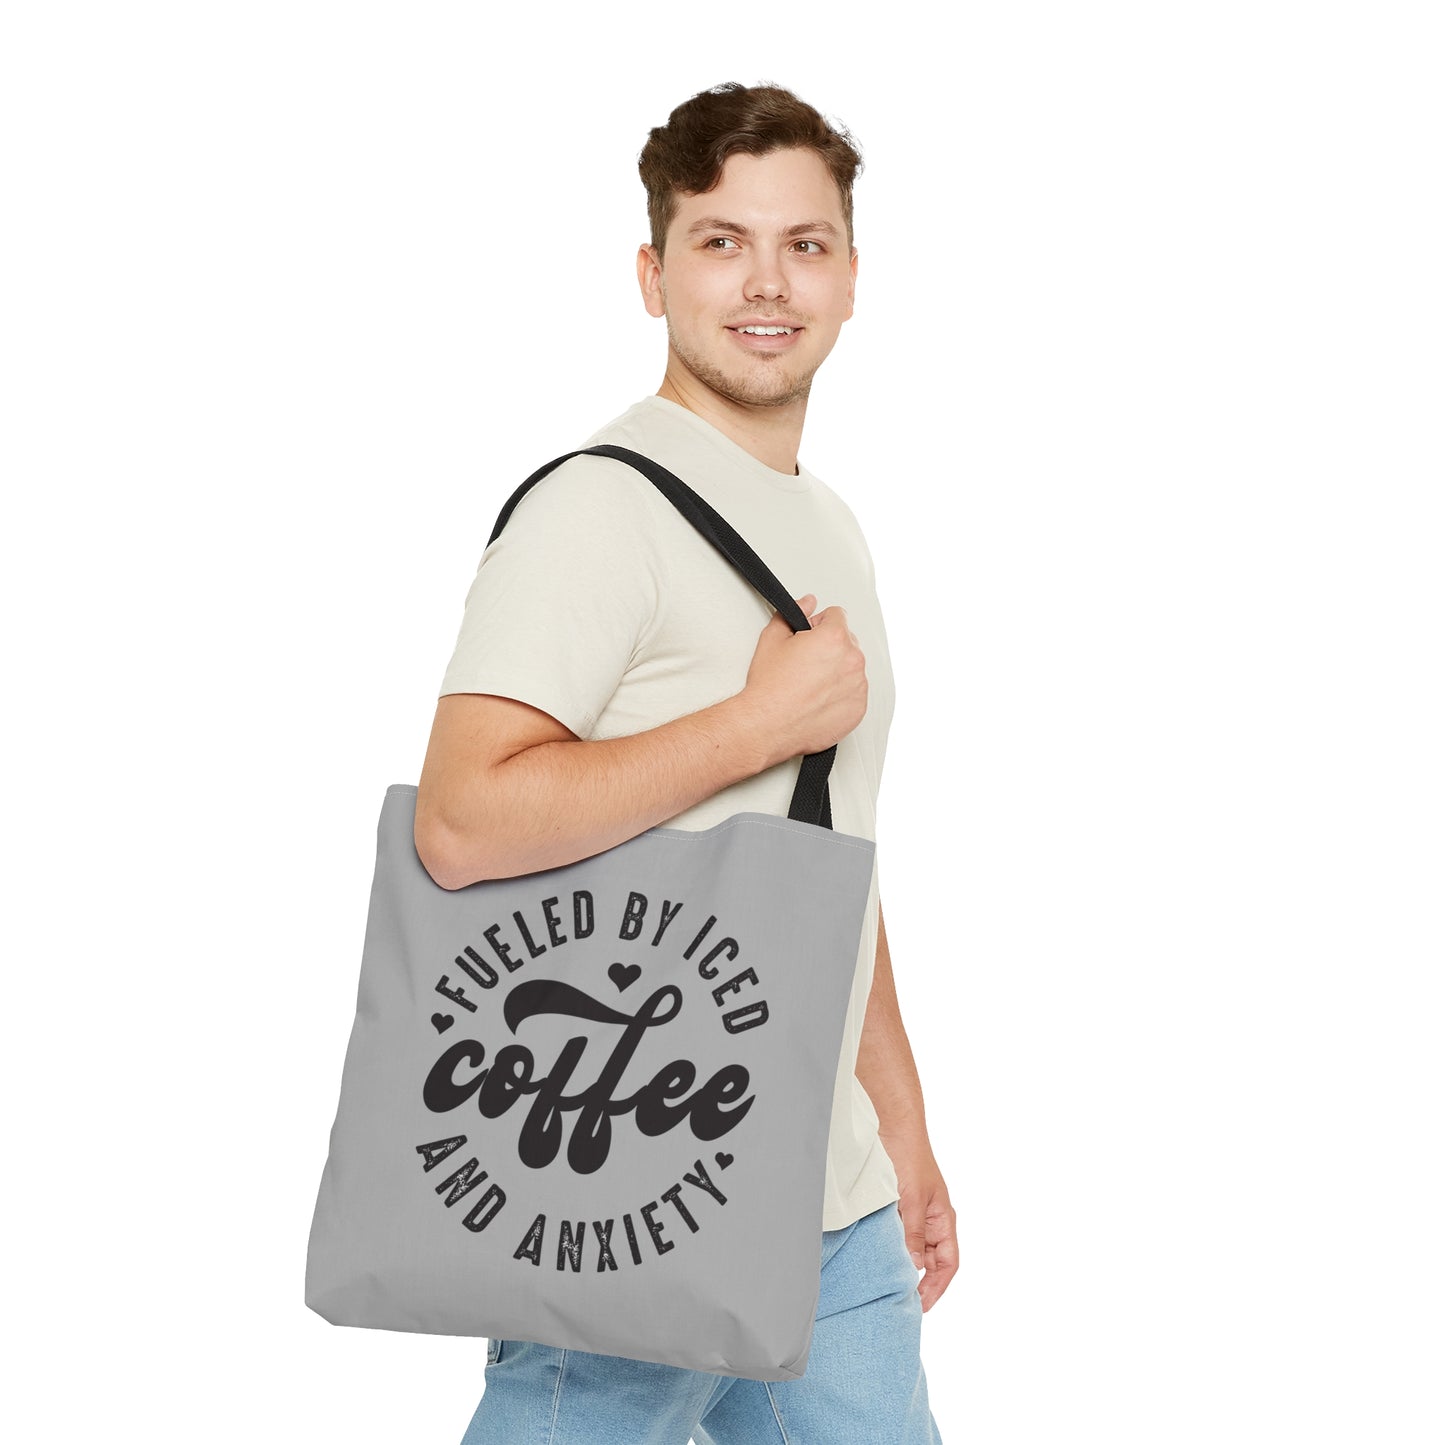 Fueled by Iced Coffee and Anxiety Tote Bag